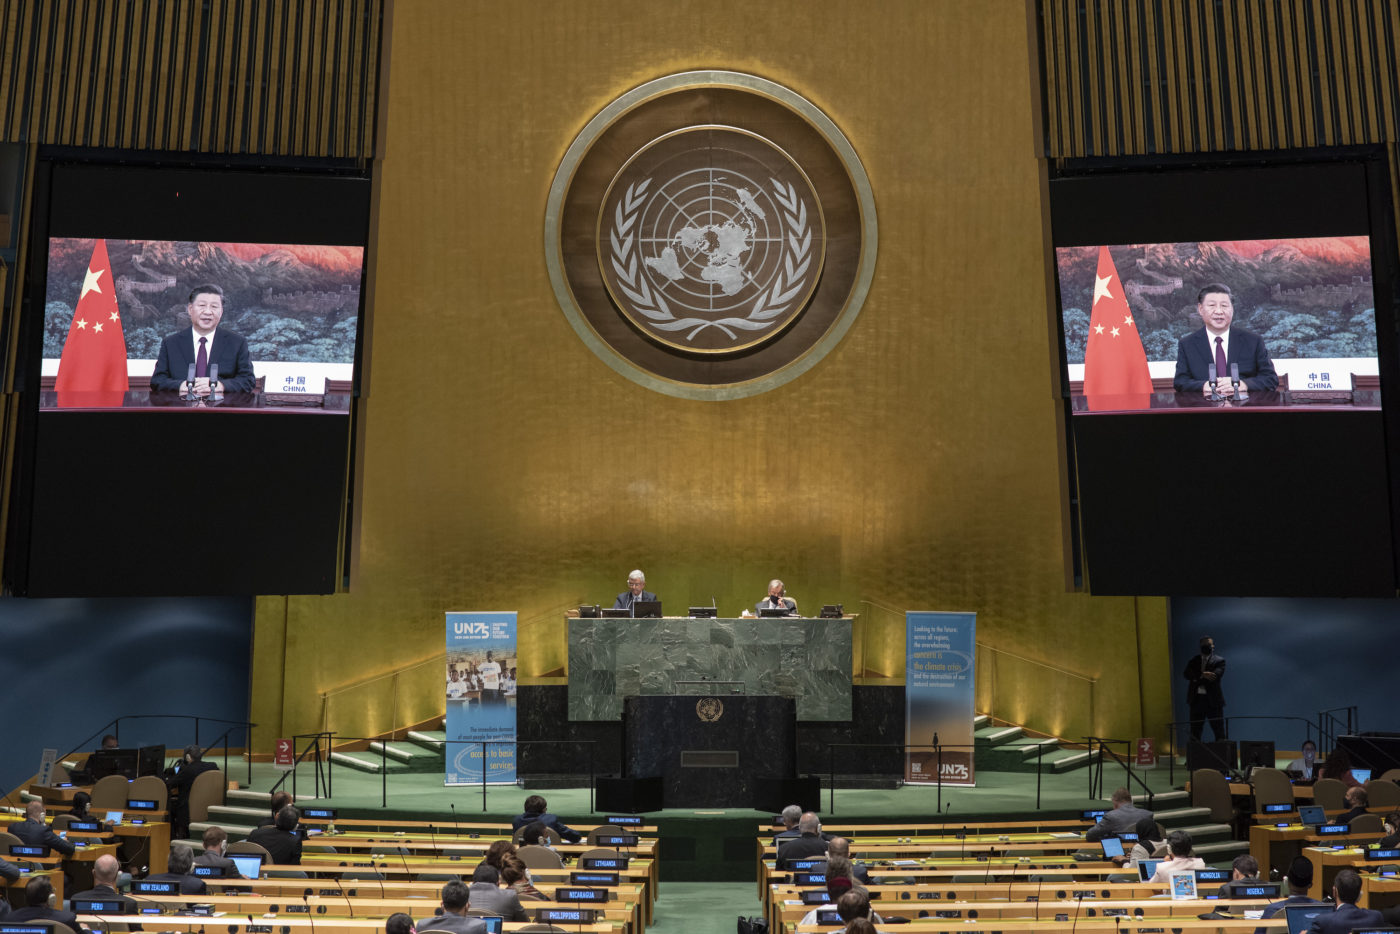 <p>Xi Jinping addresses a high-level meeting of the United Nations General Assembly on 21 September (Image: UN Multimedia)</p>